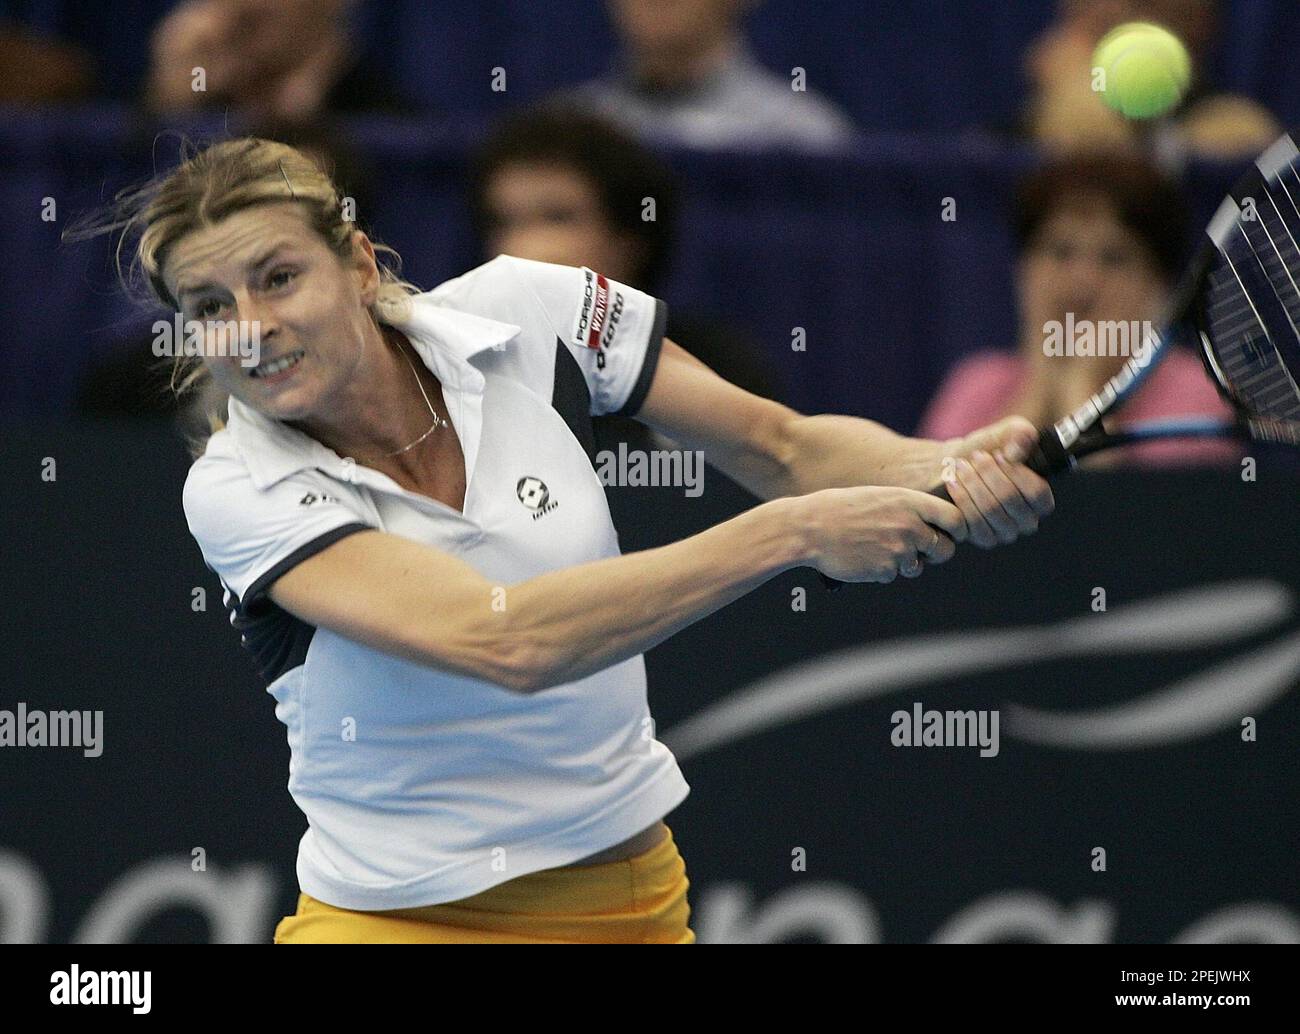 Martina Sucha of Slovakia backhands a shot to Canada's Melanie Marois during first round action Tuesday Nov. 2, 2004 at the Bell Challenge WTA tournament in Quebec City, Canada. (AP PHOTO/Jacques Boissinot) Stock Photo